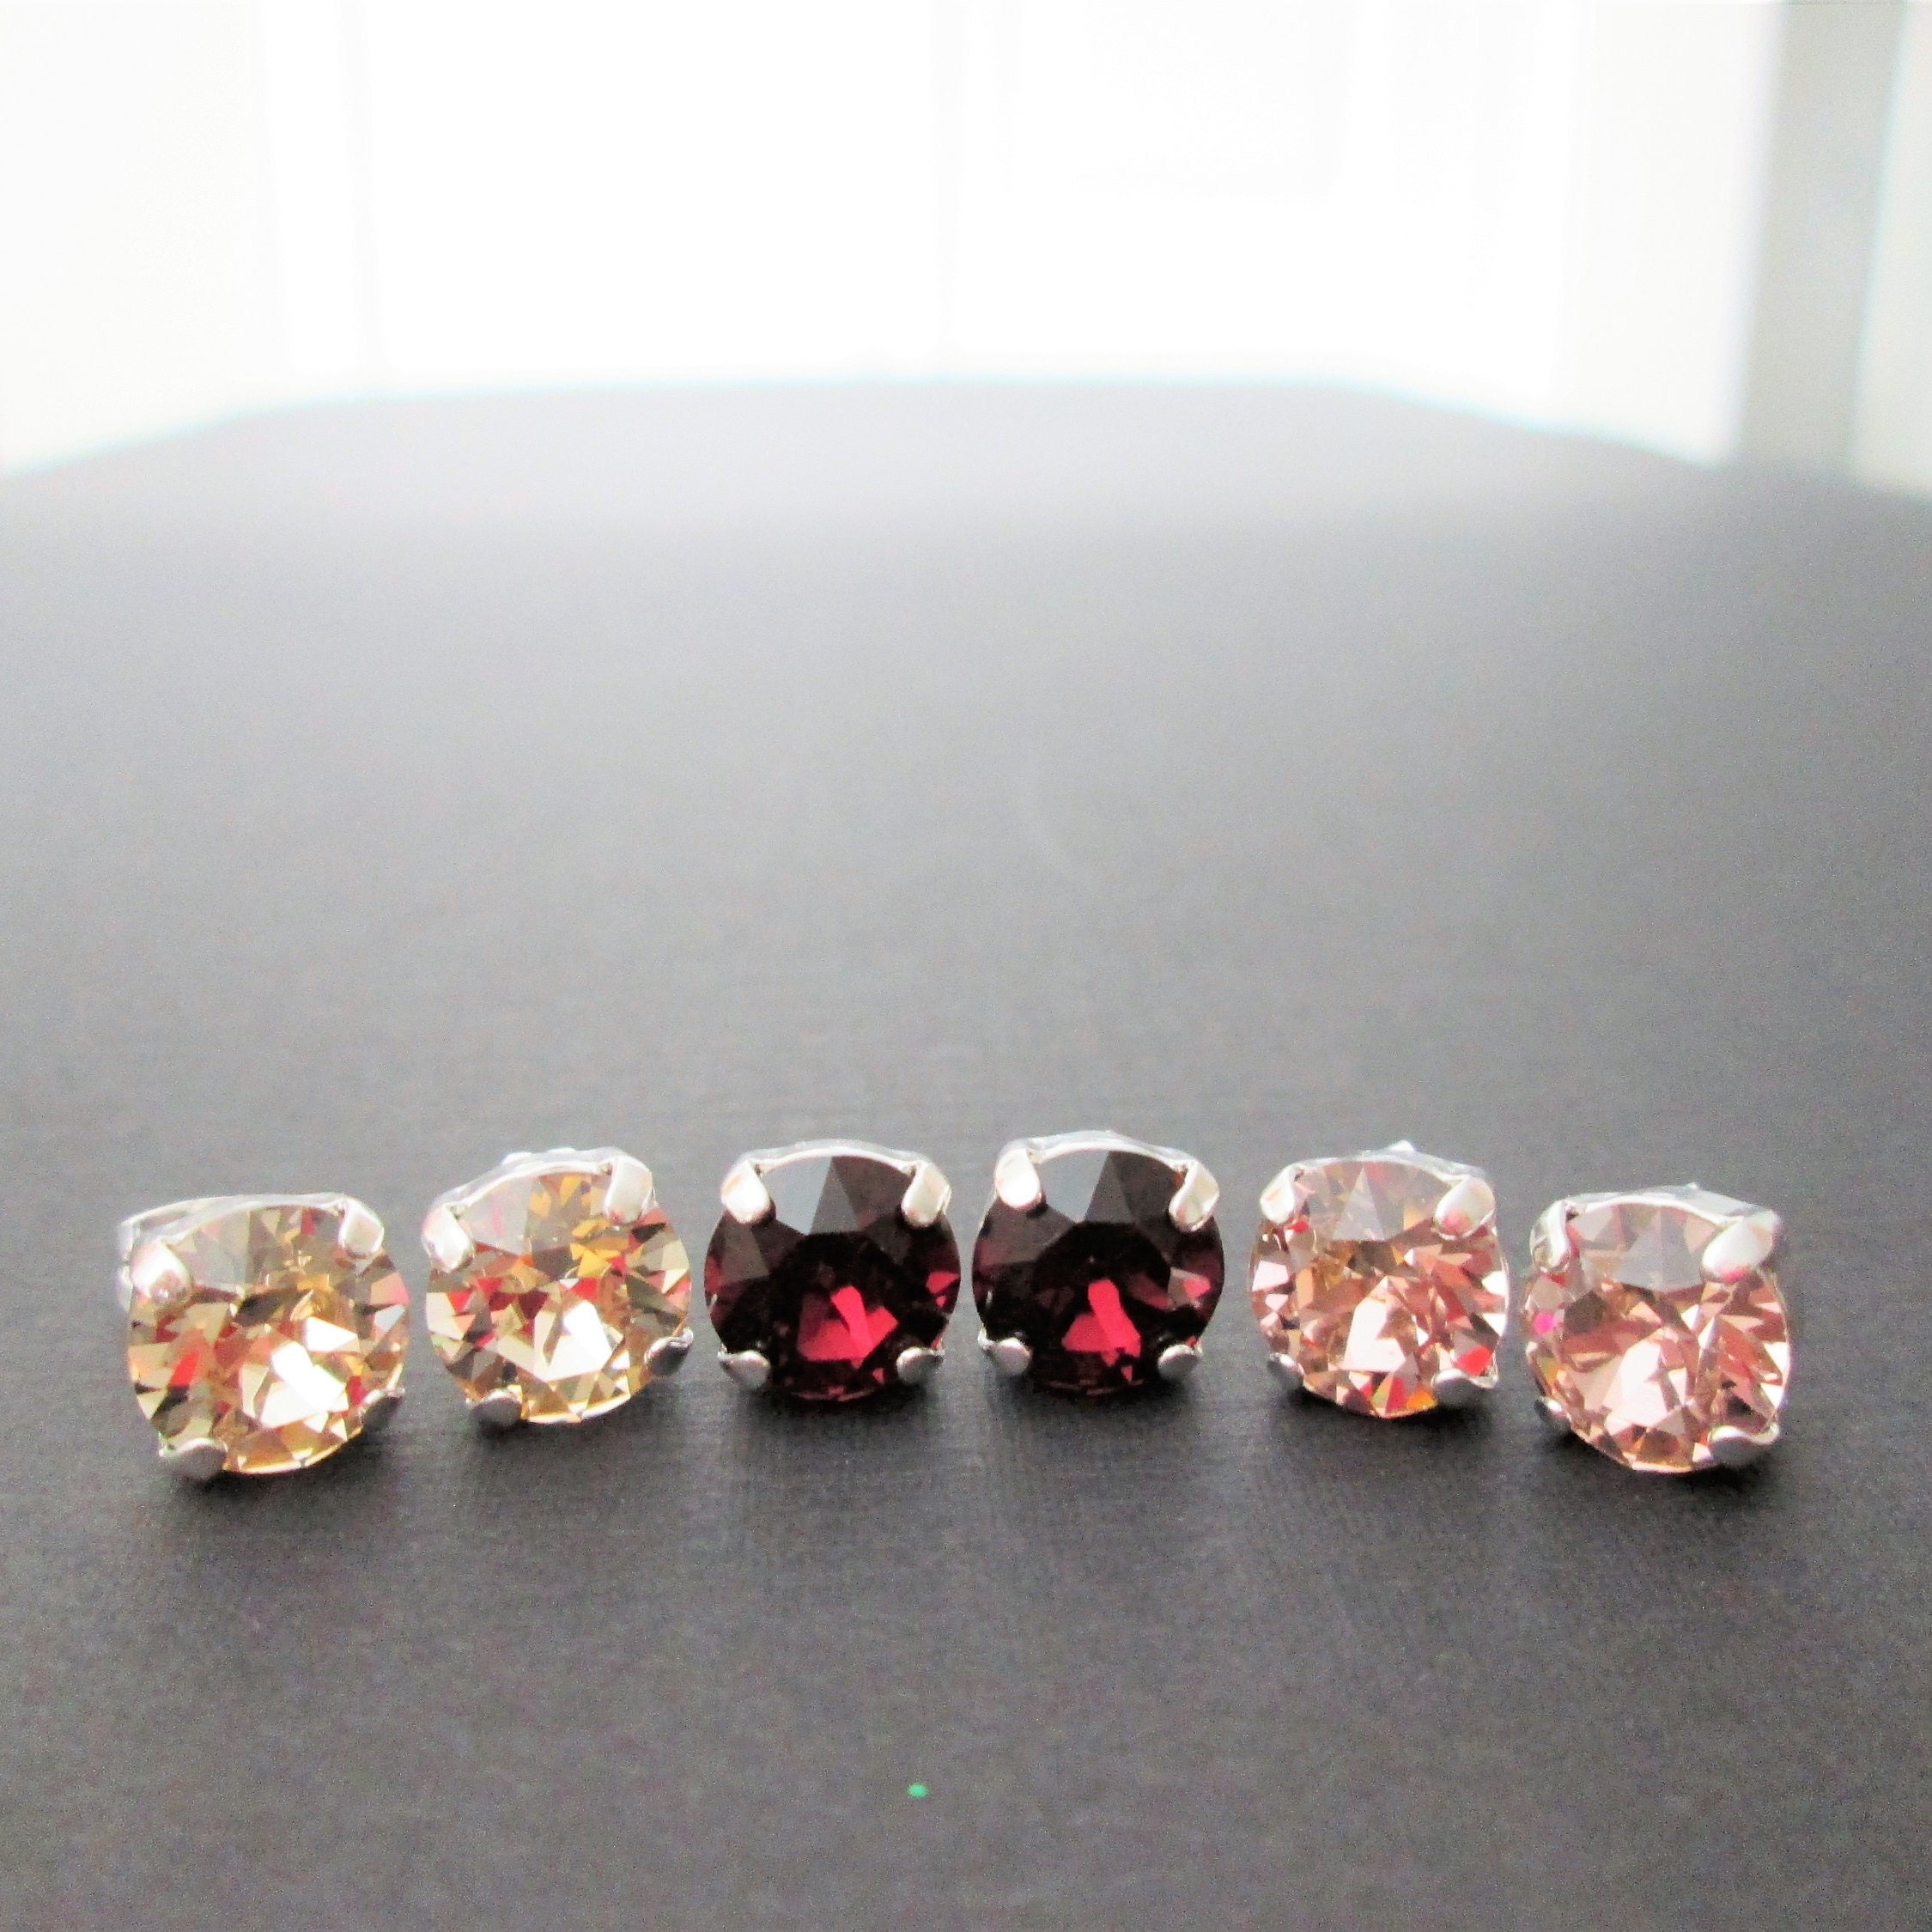 4mm Stud Earrings with Swarovski Crystals Jewellery Earrings Stud Earrings purple orange pink blue green black clear red 